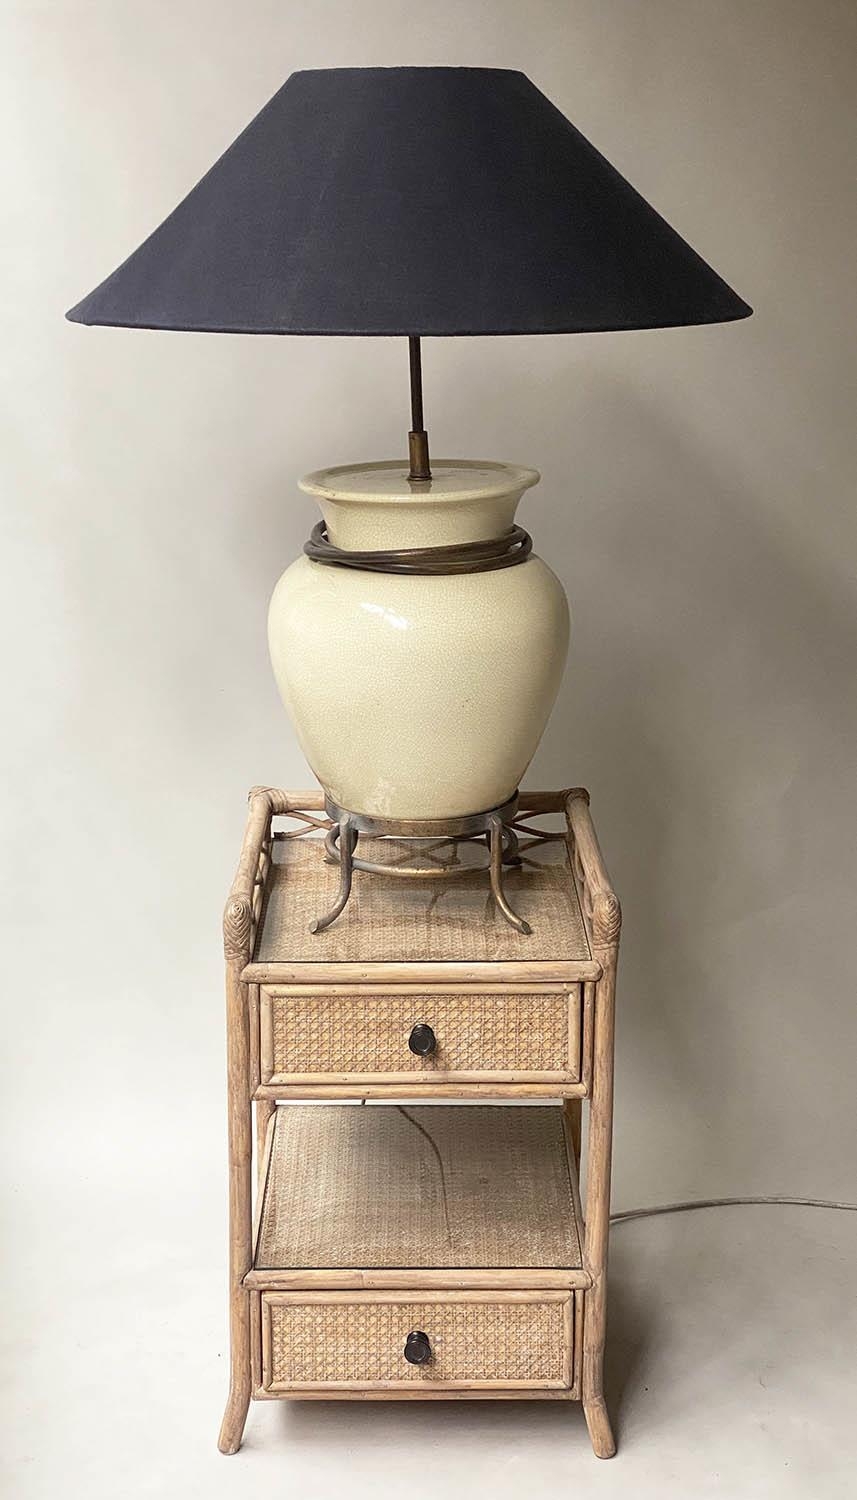 TIMOTHY OULTON SHADE LAMP, Chinese ceramic vase shaped eggshell crackelure and bronze mounted with